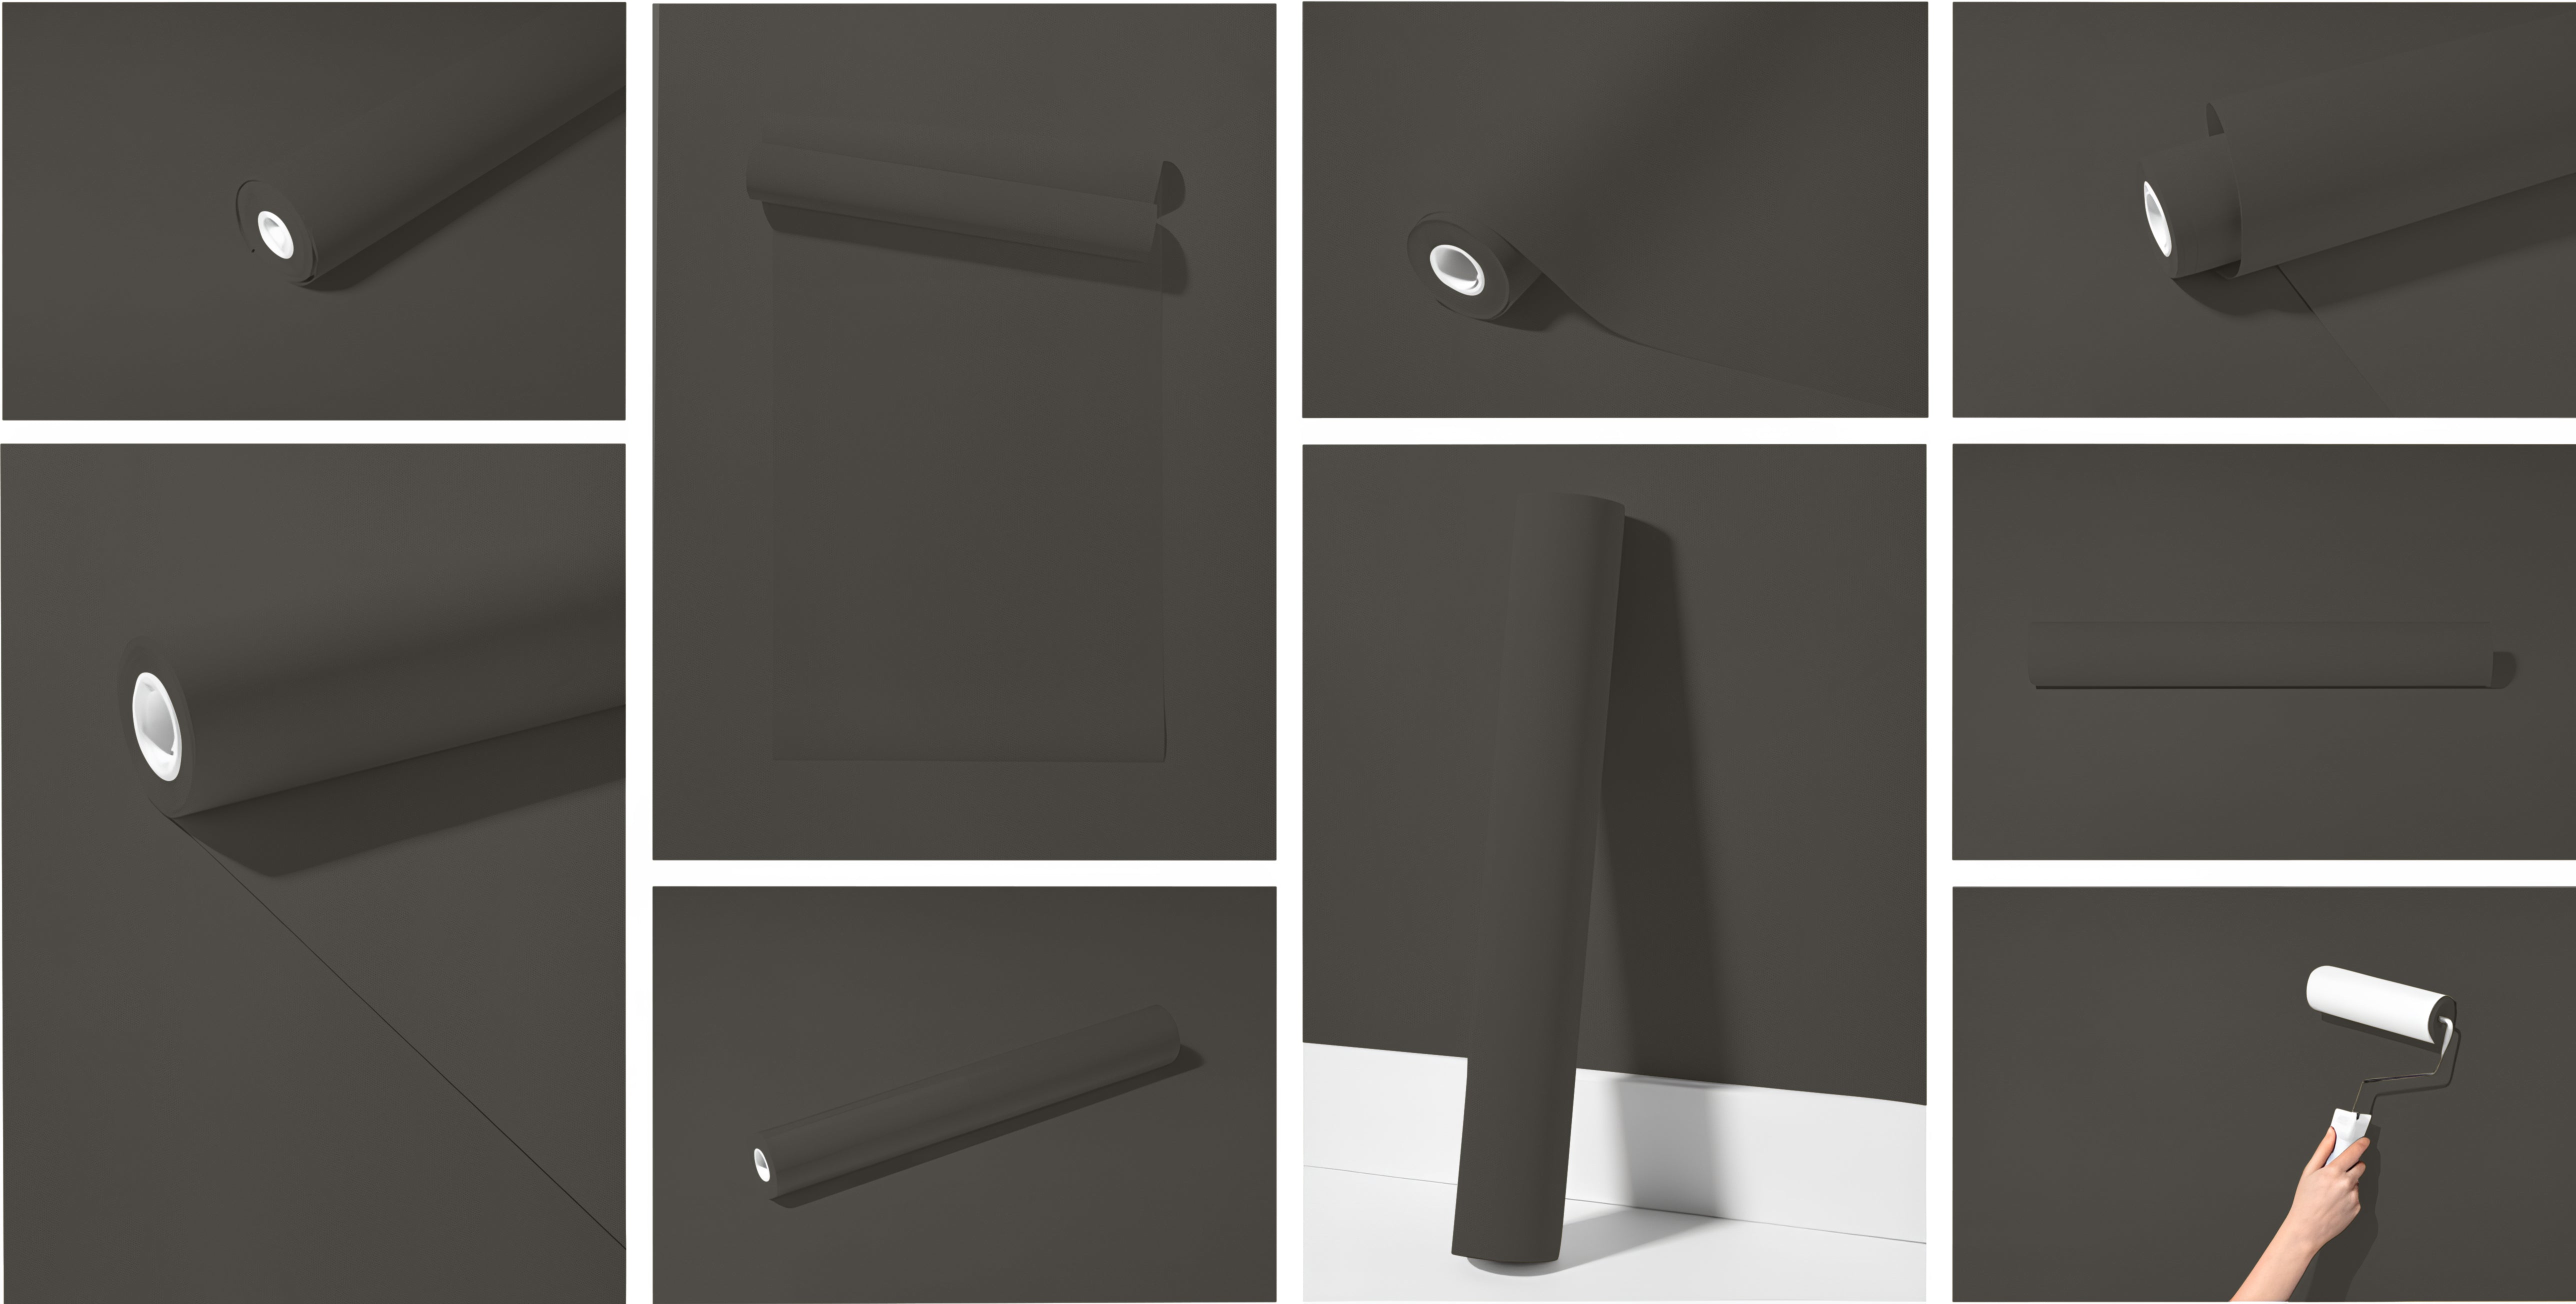 Peel & Stick Removable Re-usable Paint - Color RAL 7022 Umbra Grey - offRAL™ - RALRAW LLC, USA